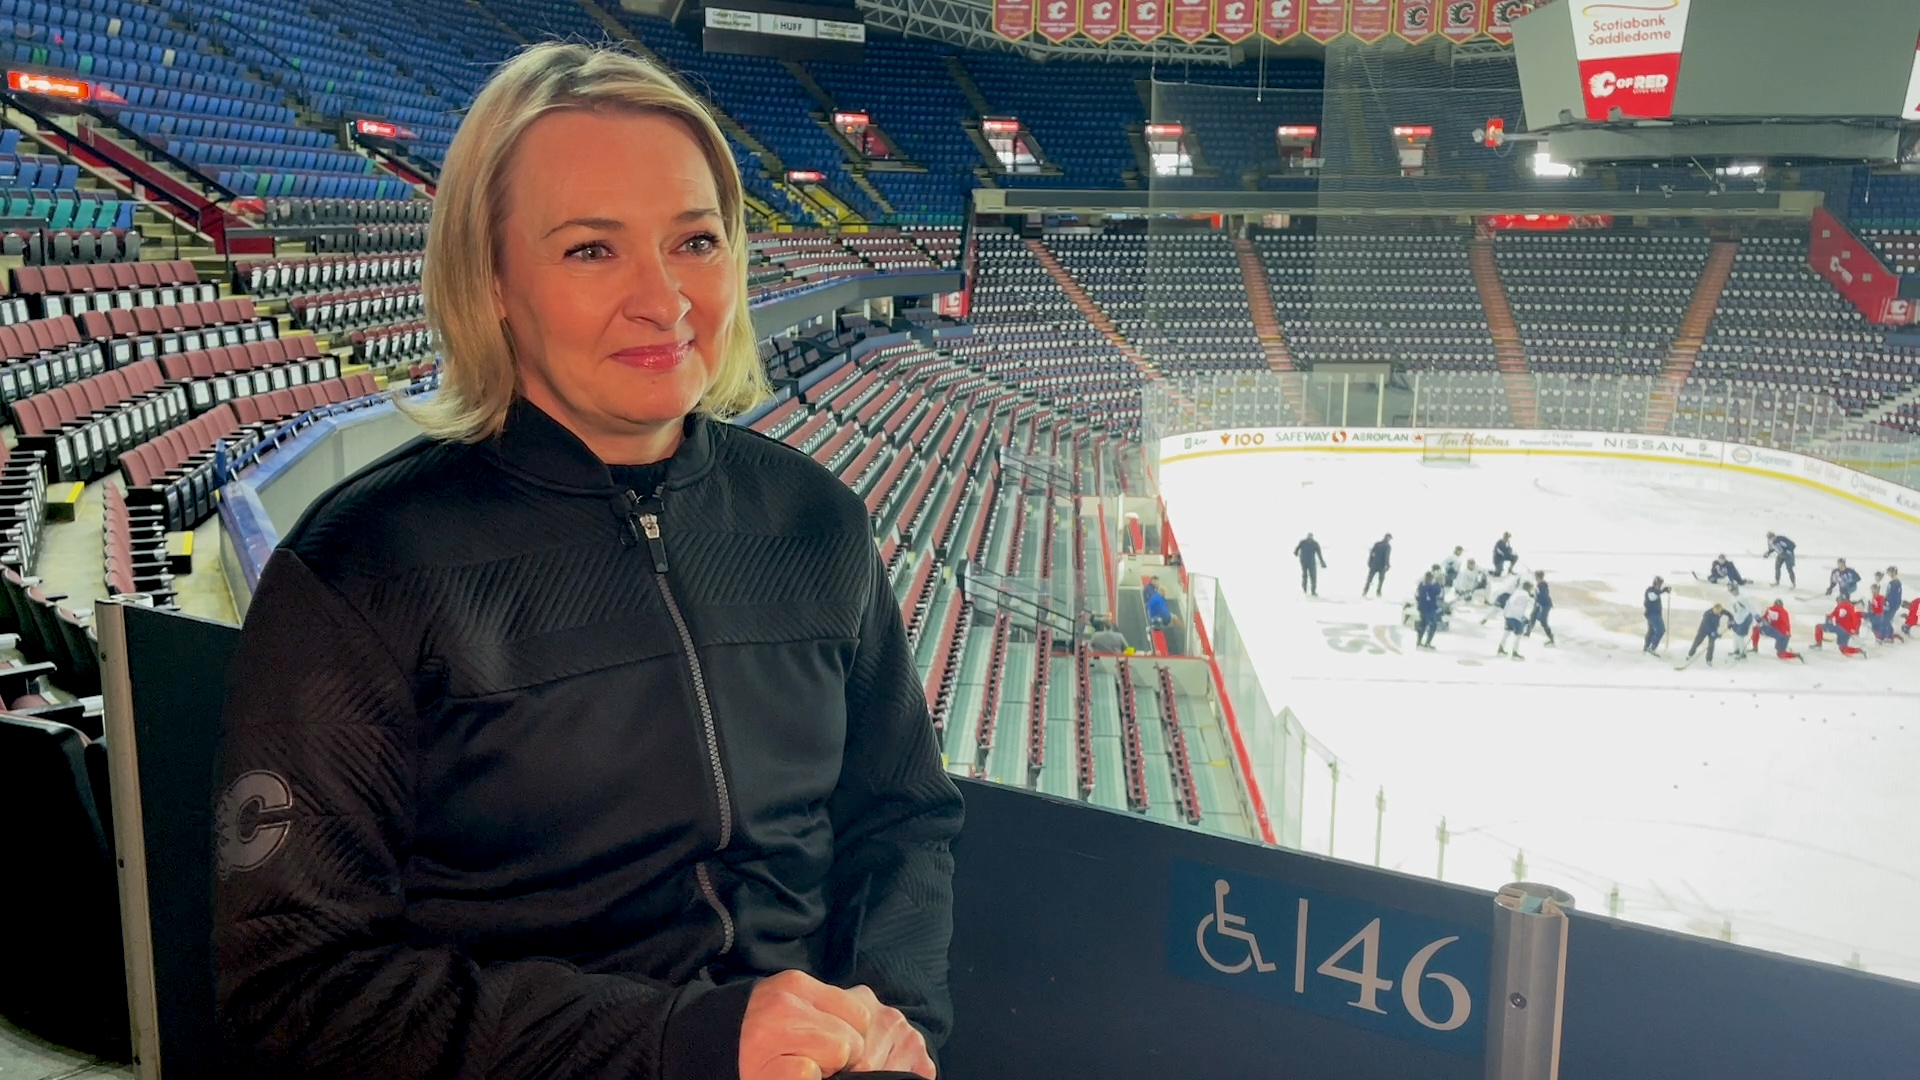 Susan Darrington, VP of Building Operations for the Saddledome in Calgary